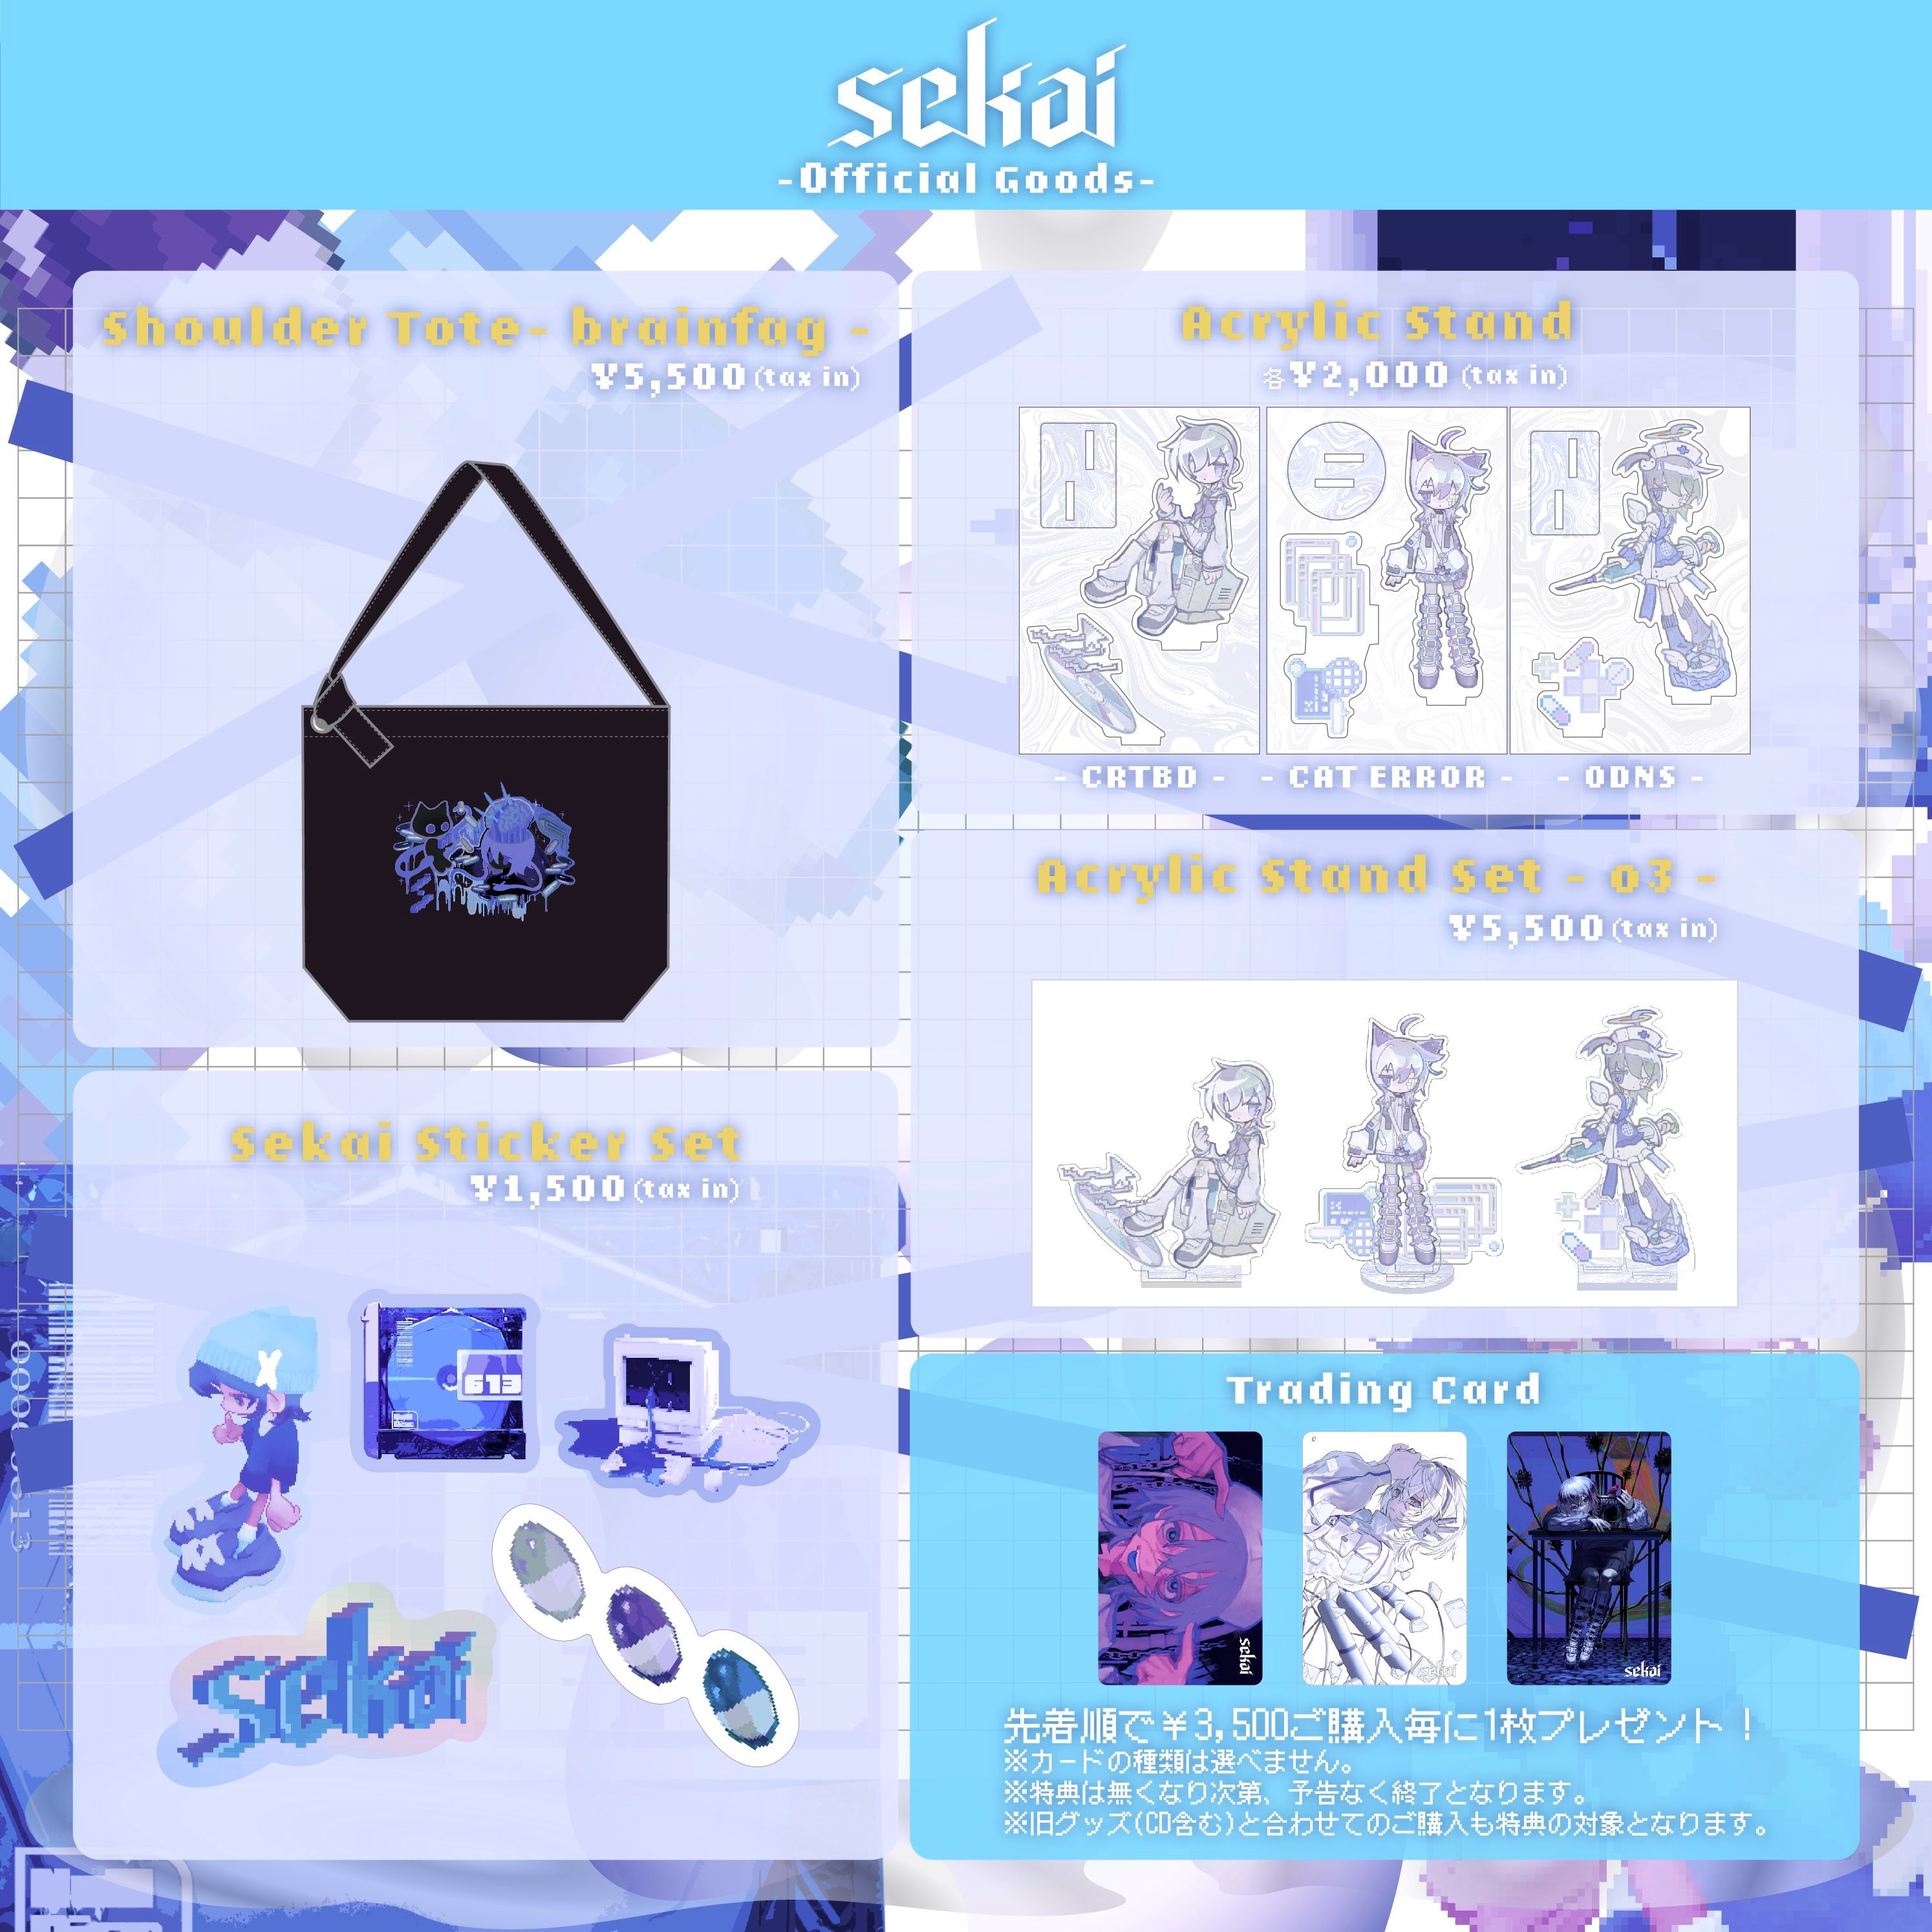 New Official Goods 販売が決定！